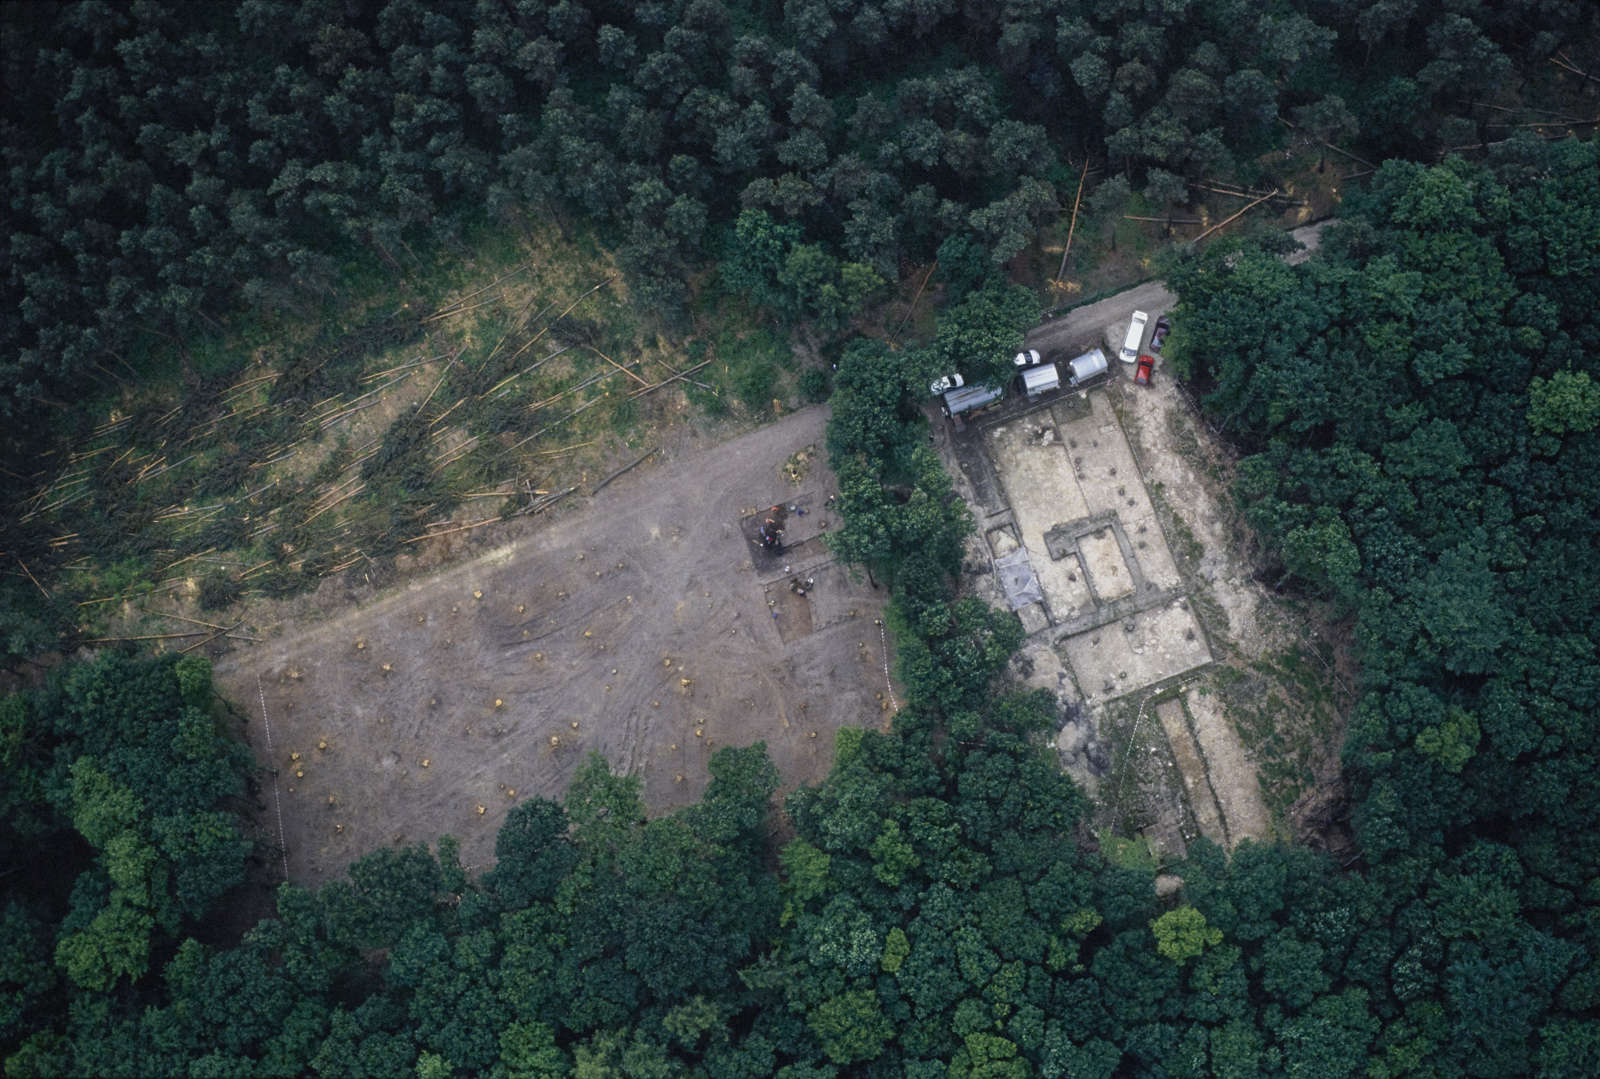 The excavation area on the Mittelberg hill near Nebra, aerial photograph.